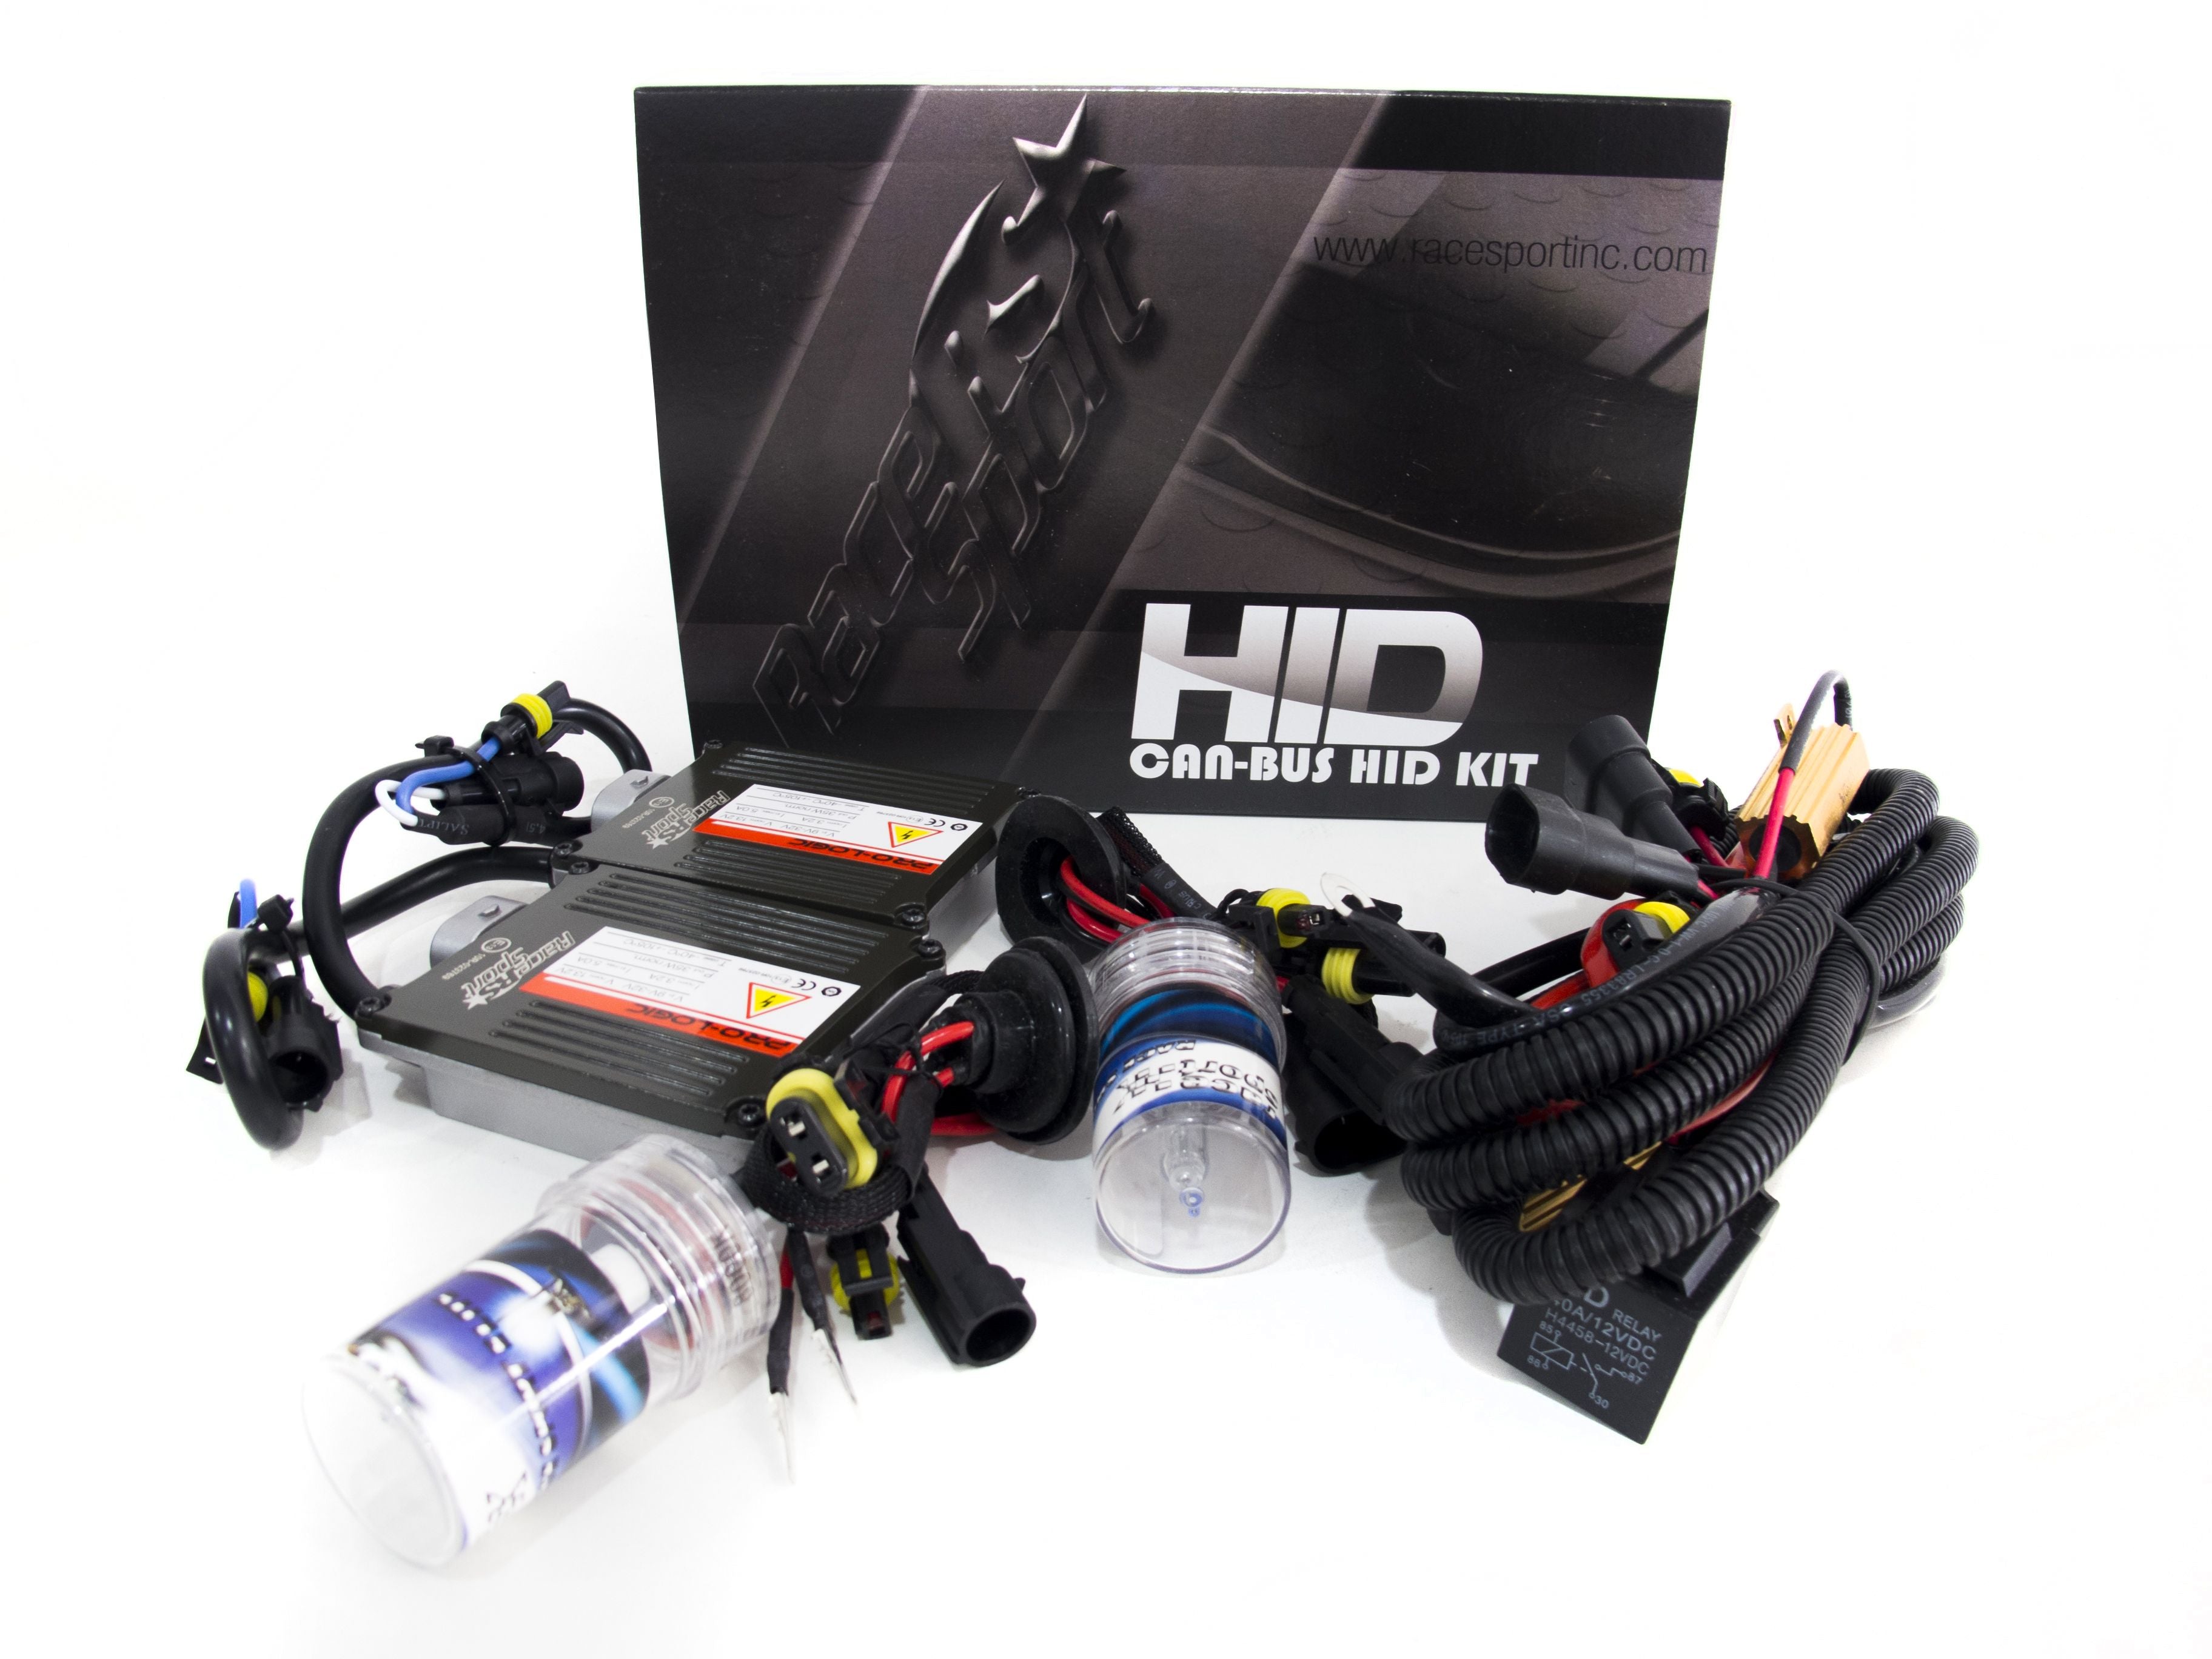 Race Sport H15 GEN 1Canbus HID Mid-Slim Ballast Kit with Relay Resistor Harness H15-5K-G1-CANBUS-R